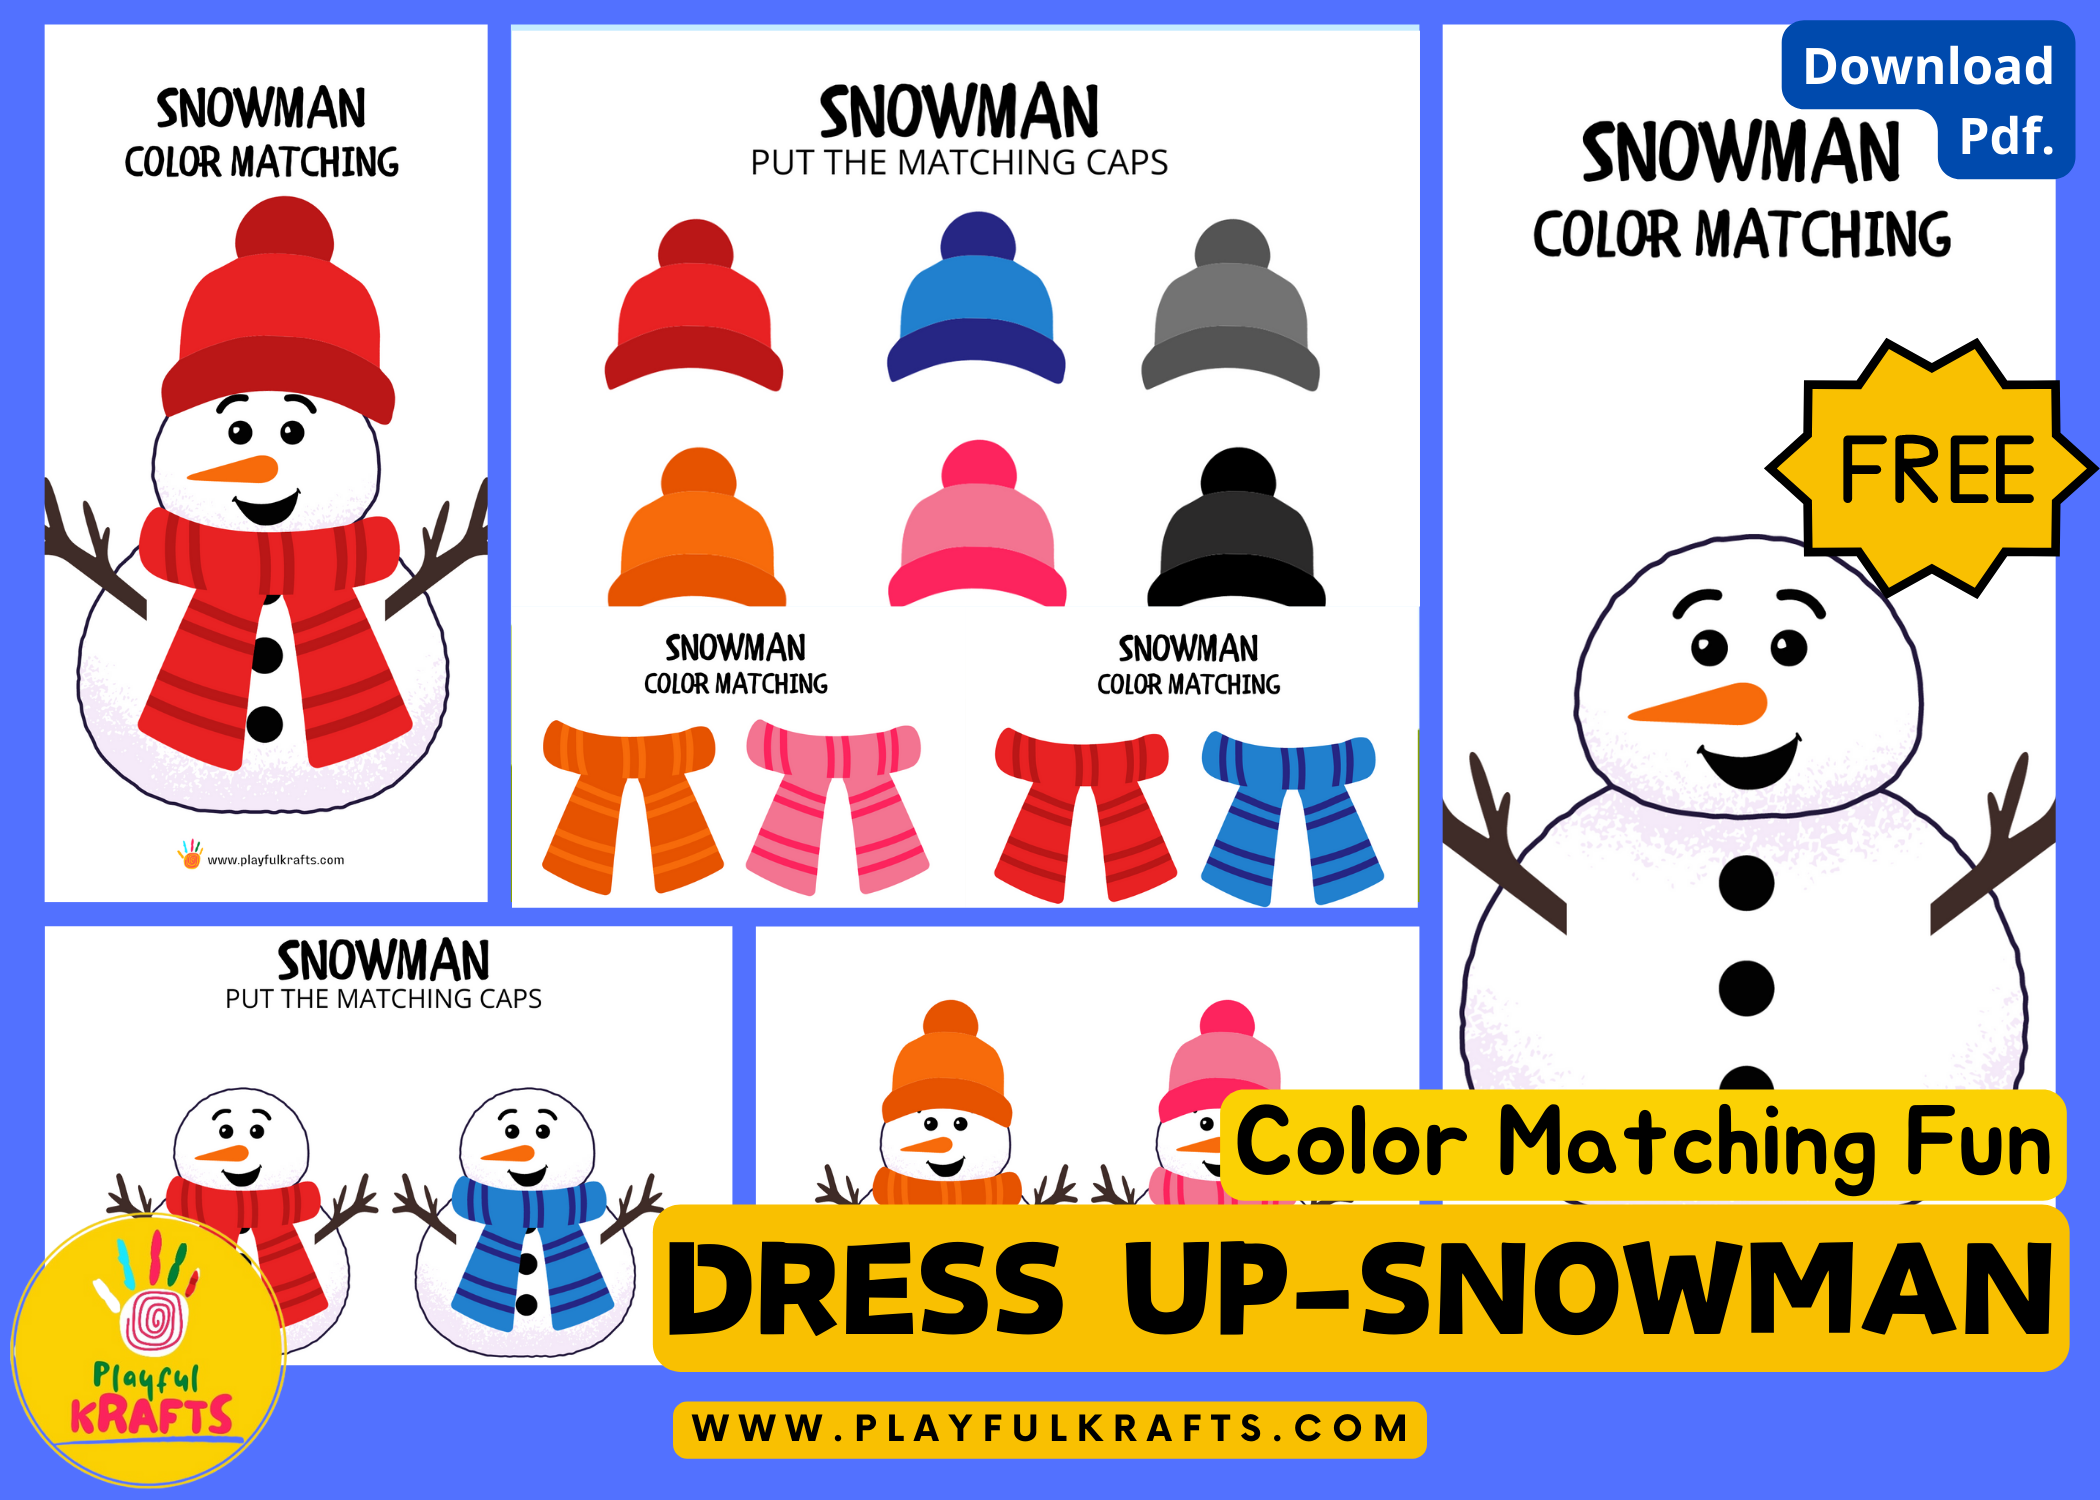 snowman-color-matching